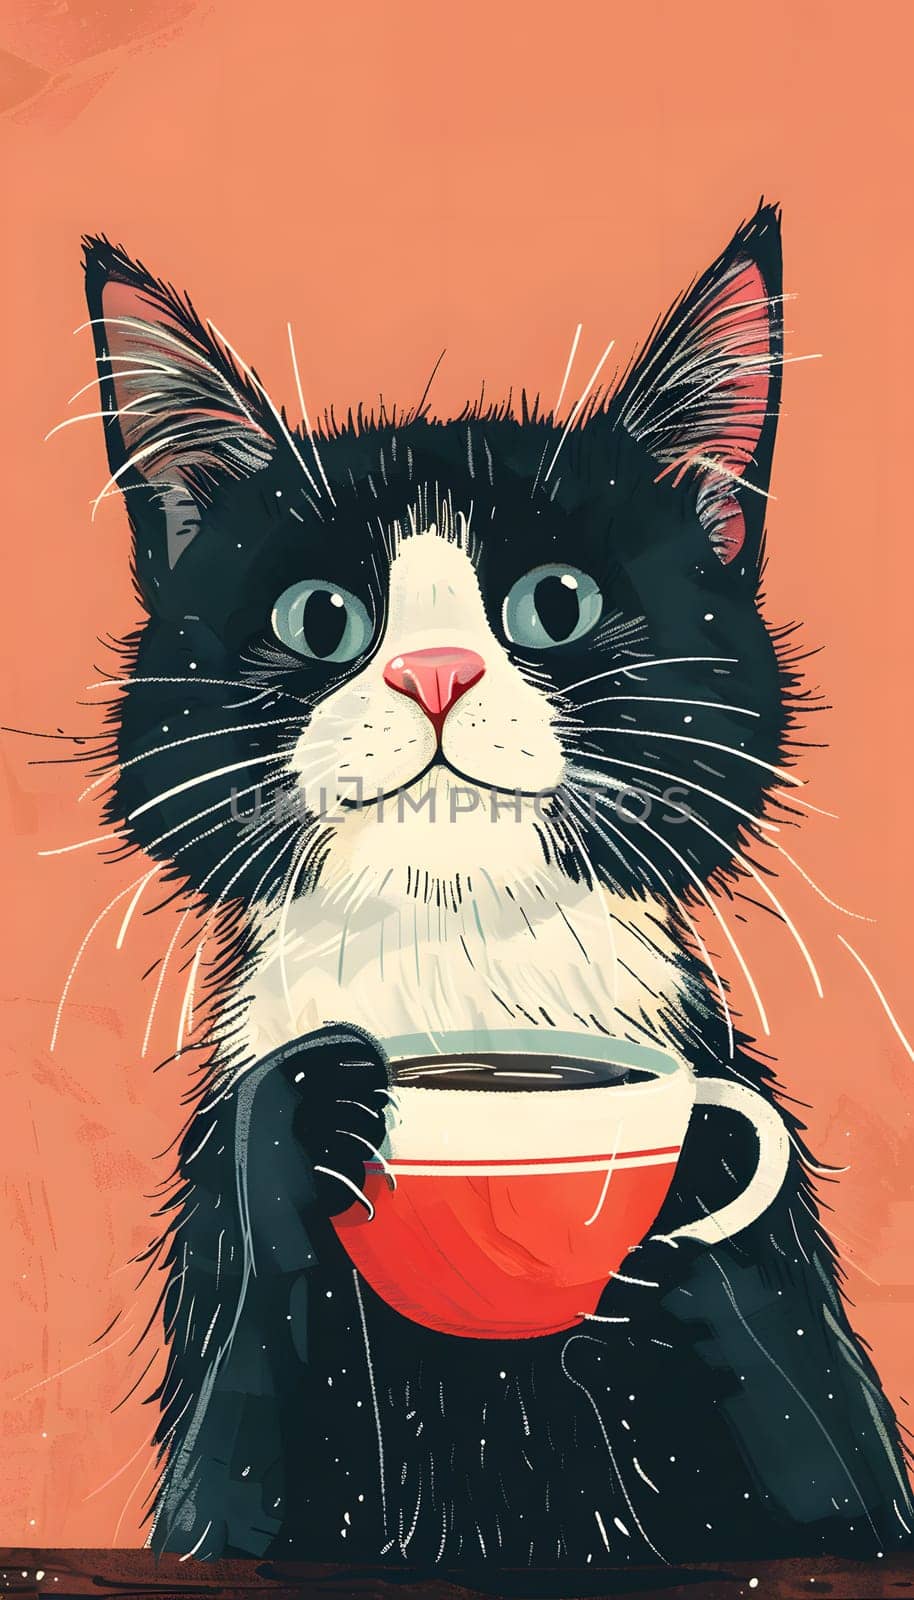 A Felidae, small to mediumsized carnivore cat with whiskers is holding a cup of coffee near a window. The cats gesture is reminiscent of a painting with its snout pointed towards a plant